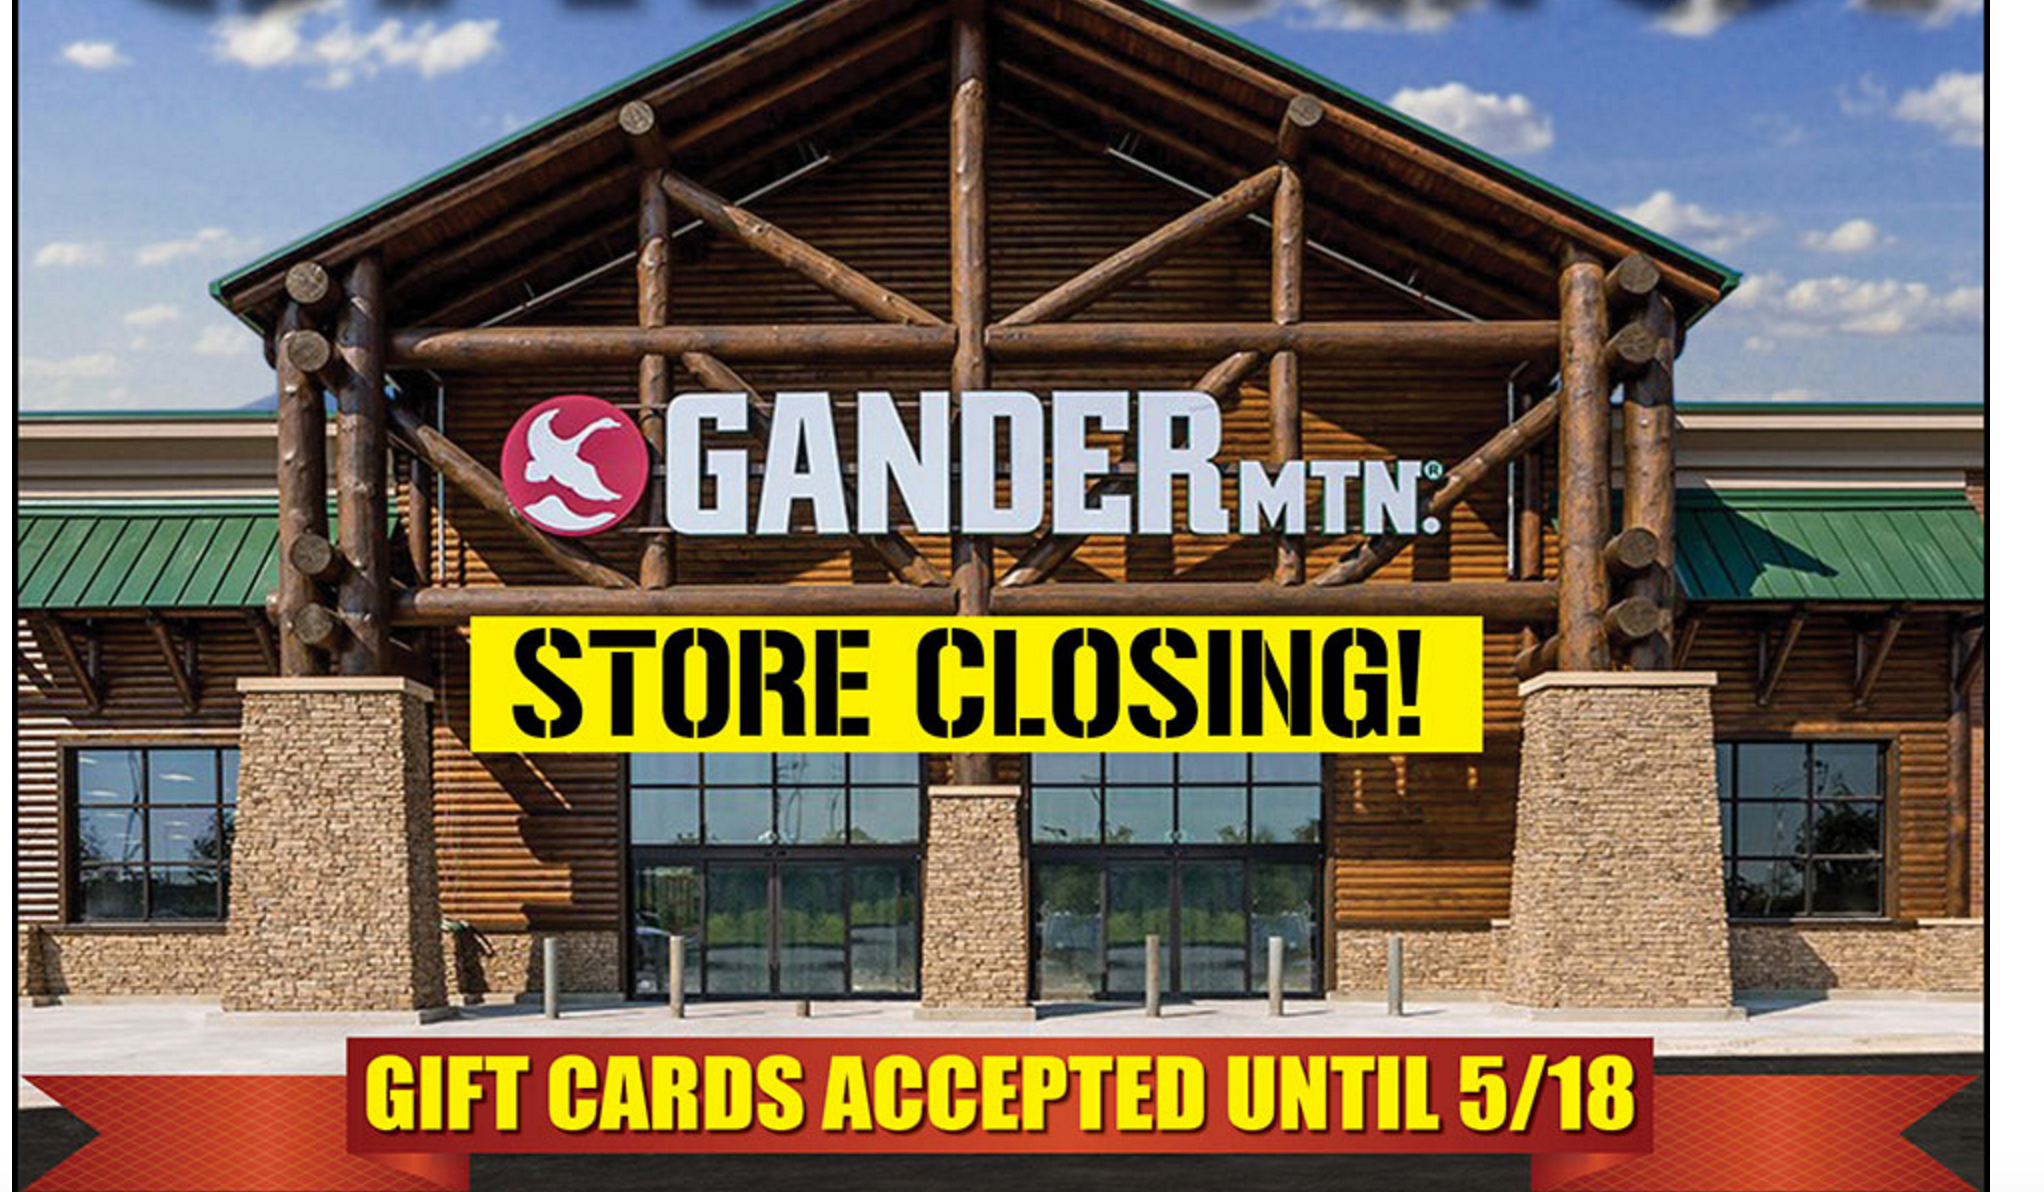 Gander Mountain Advertises That All Stores Are Closing, But They Aren’t